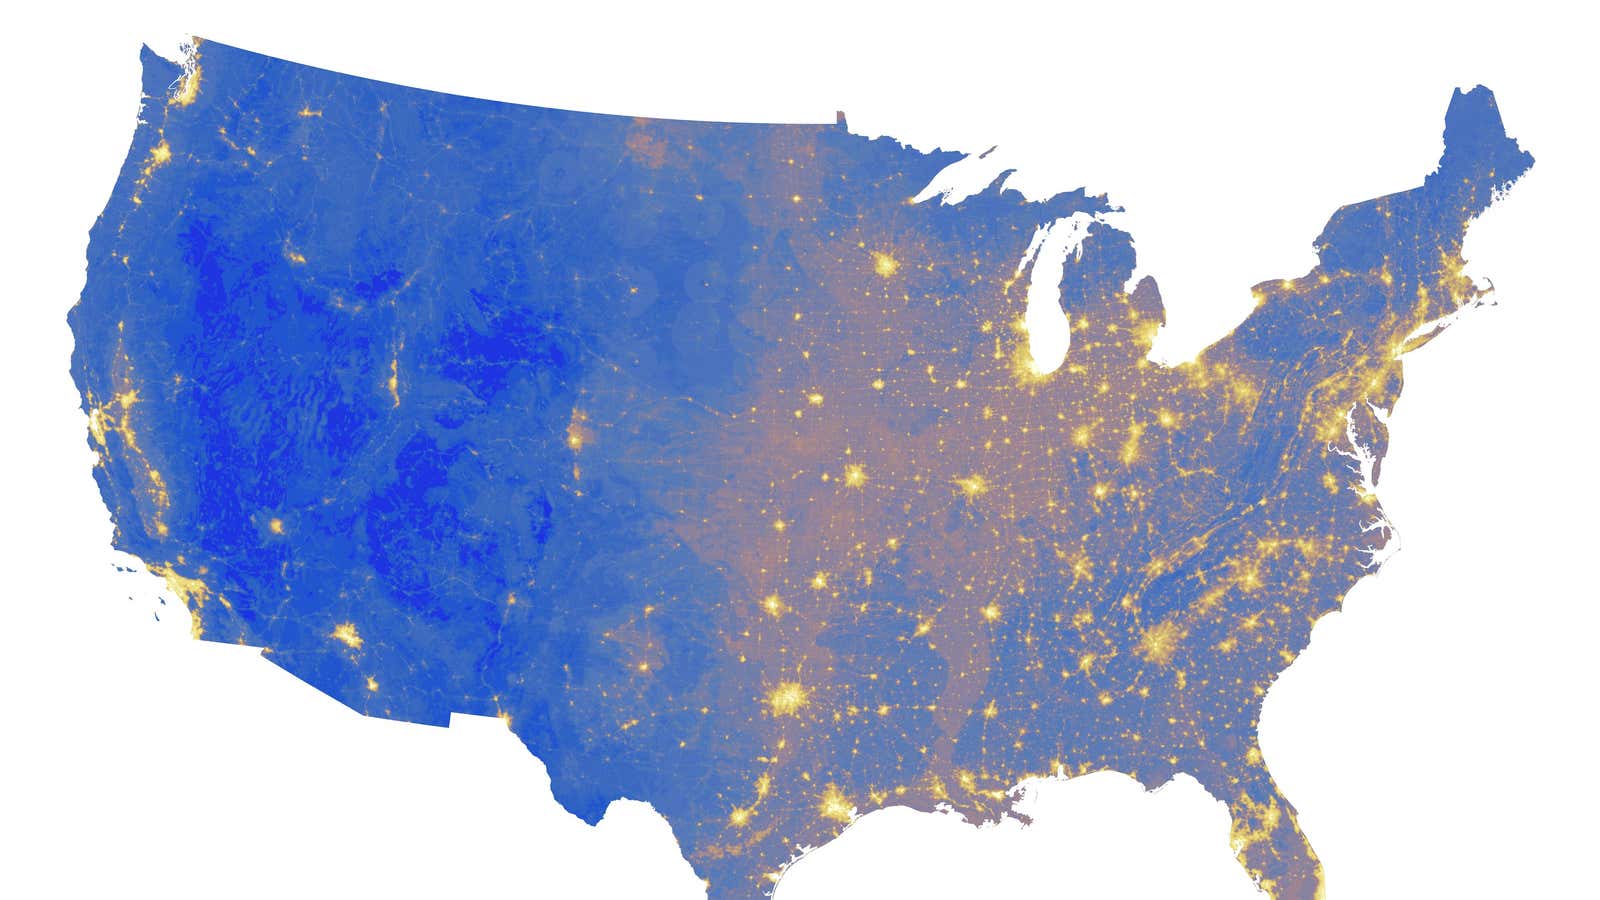 The dark blue areas are the quietest, and the yellow to white are the loudest.